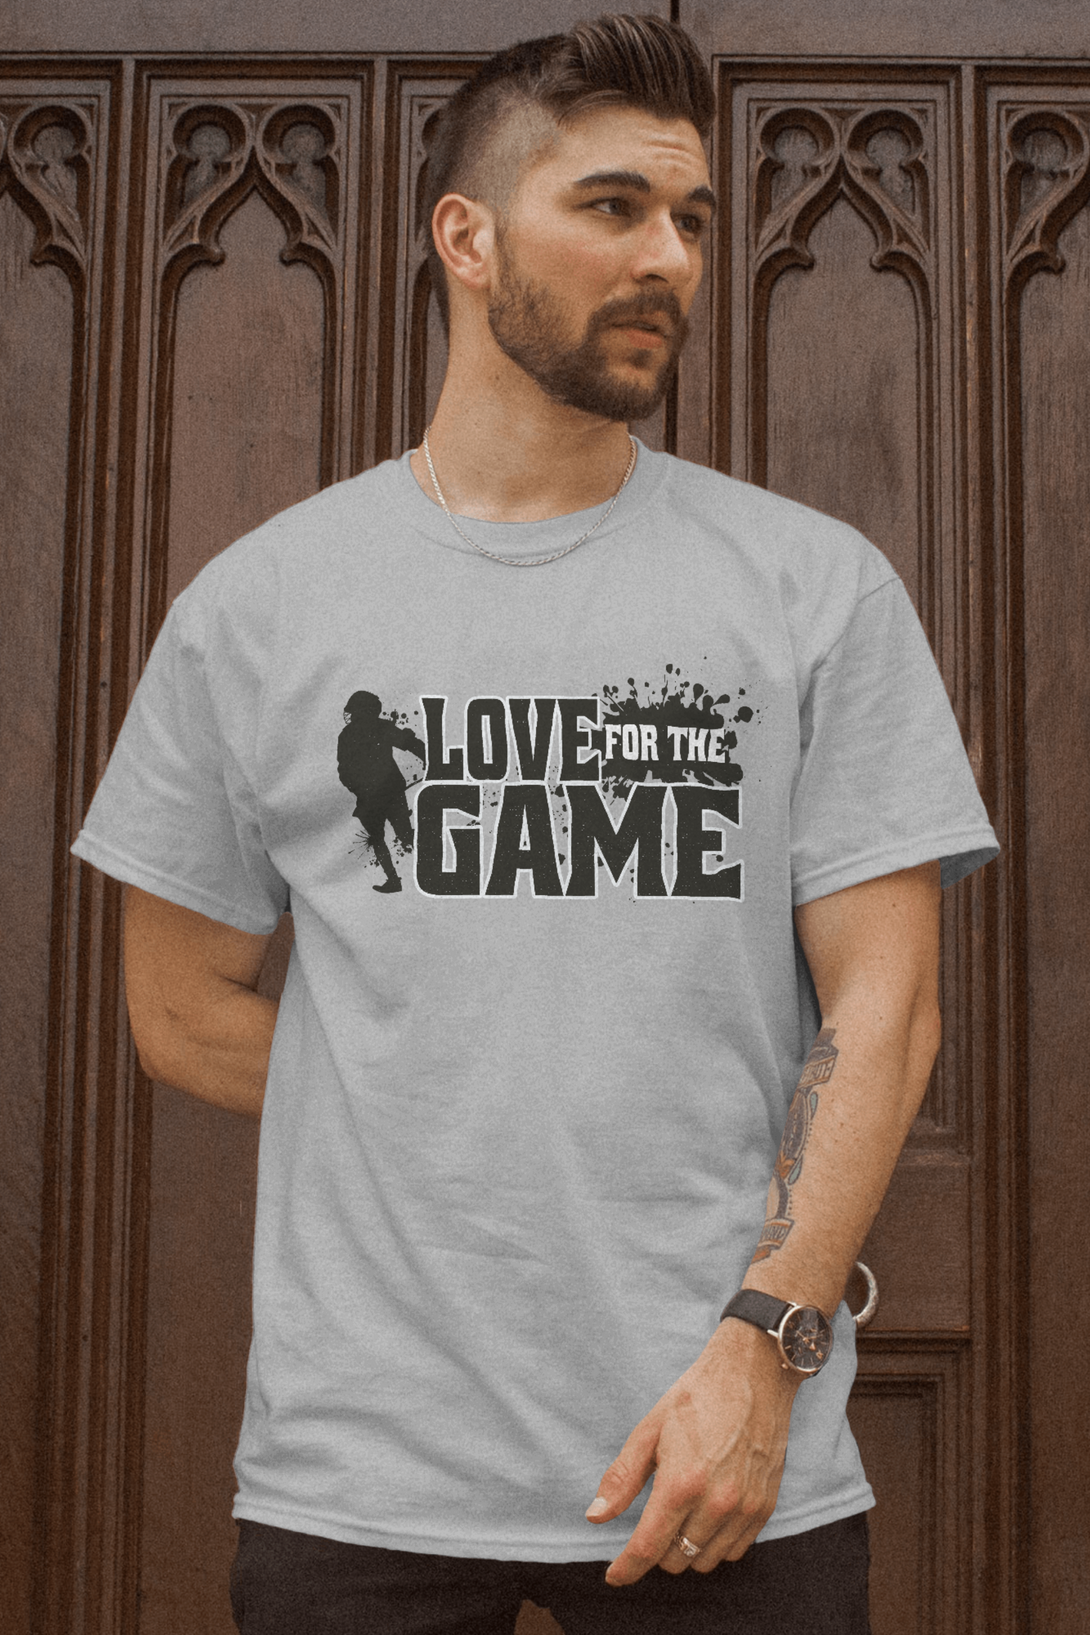 Love For The Game Printed T-Shirt For Men - WowWaves - 3